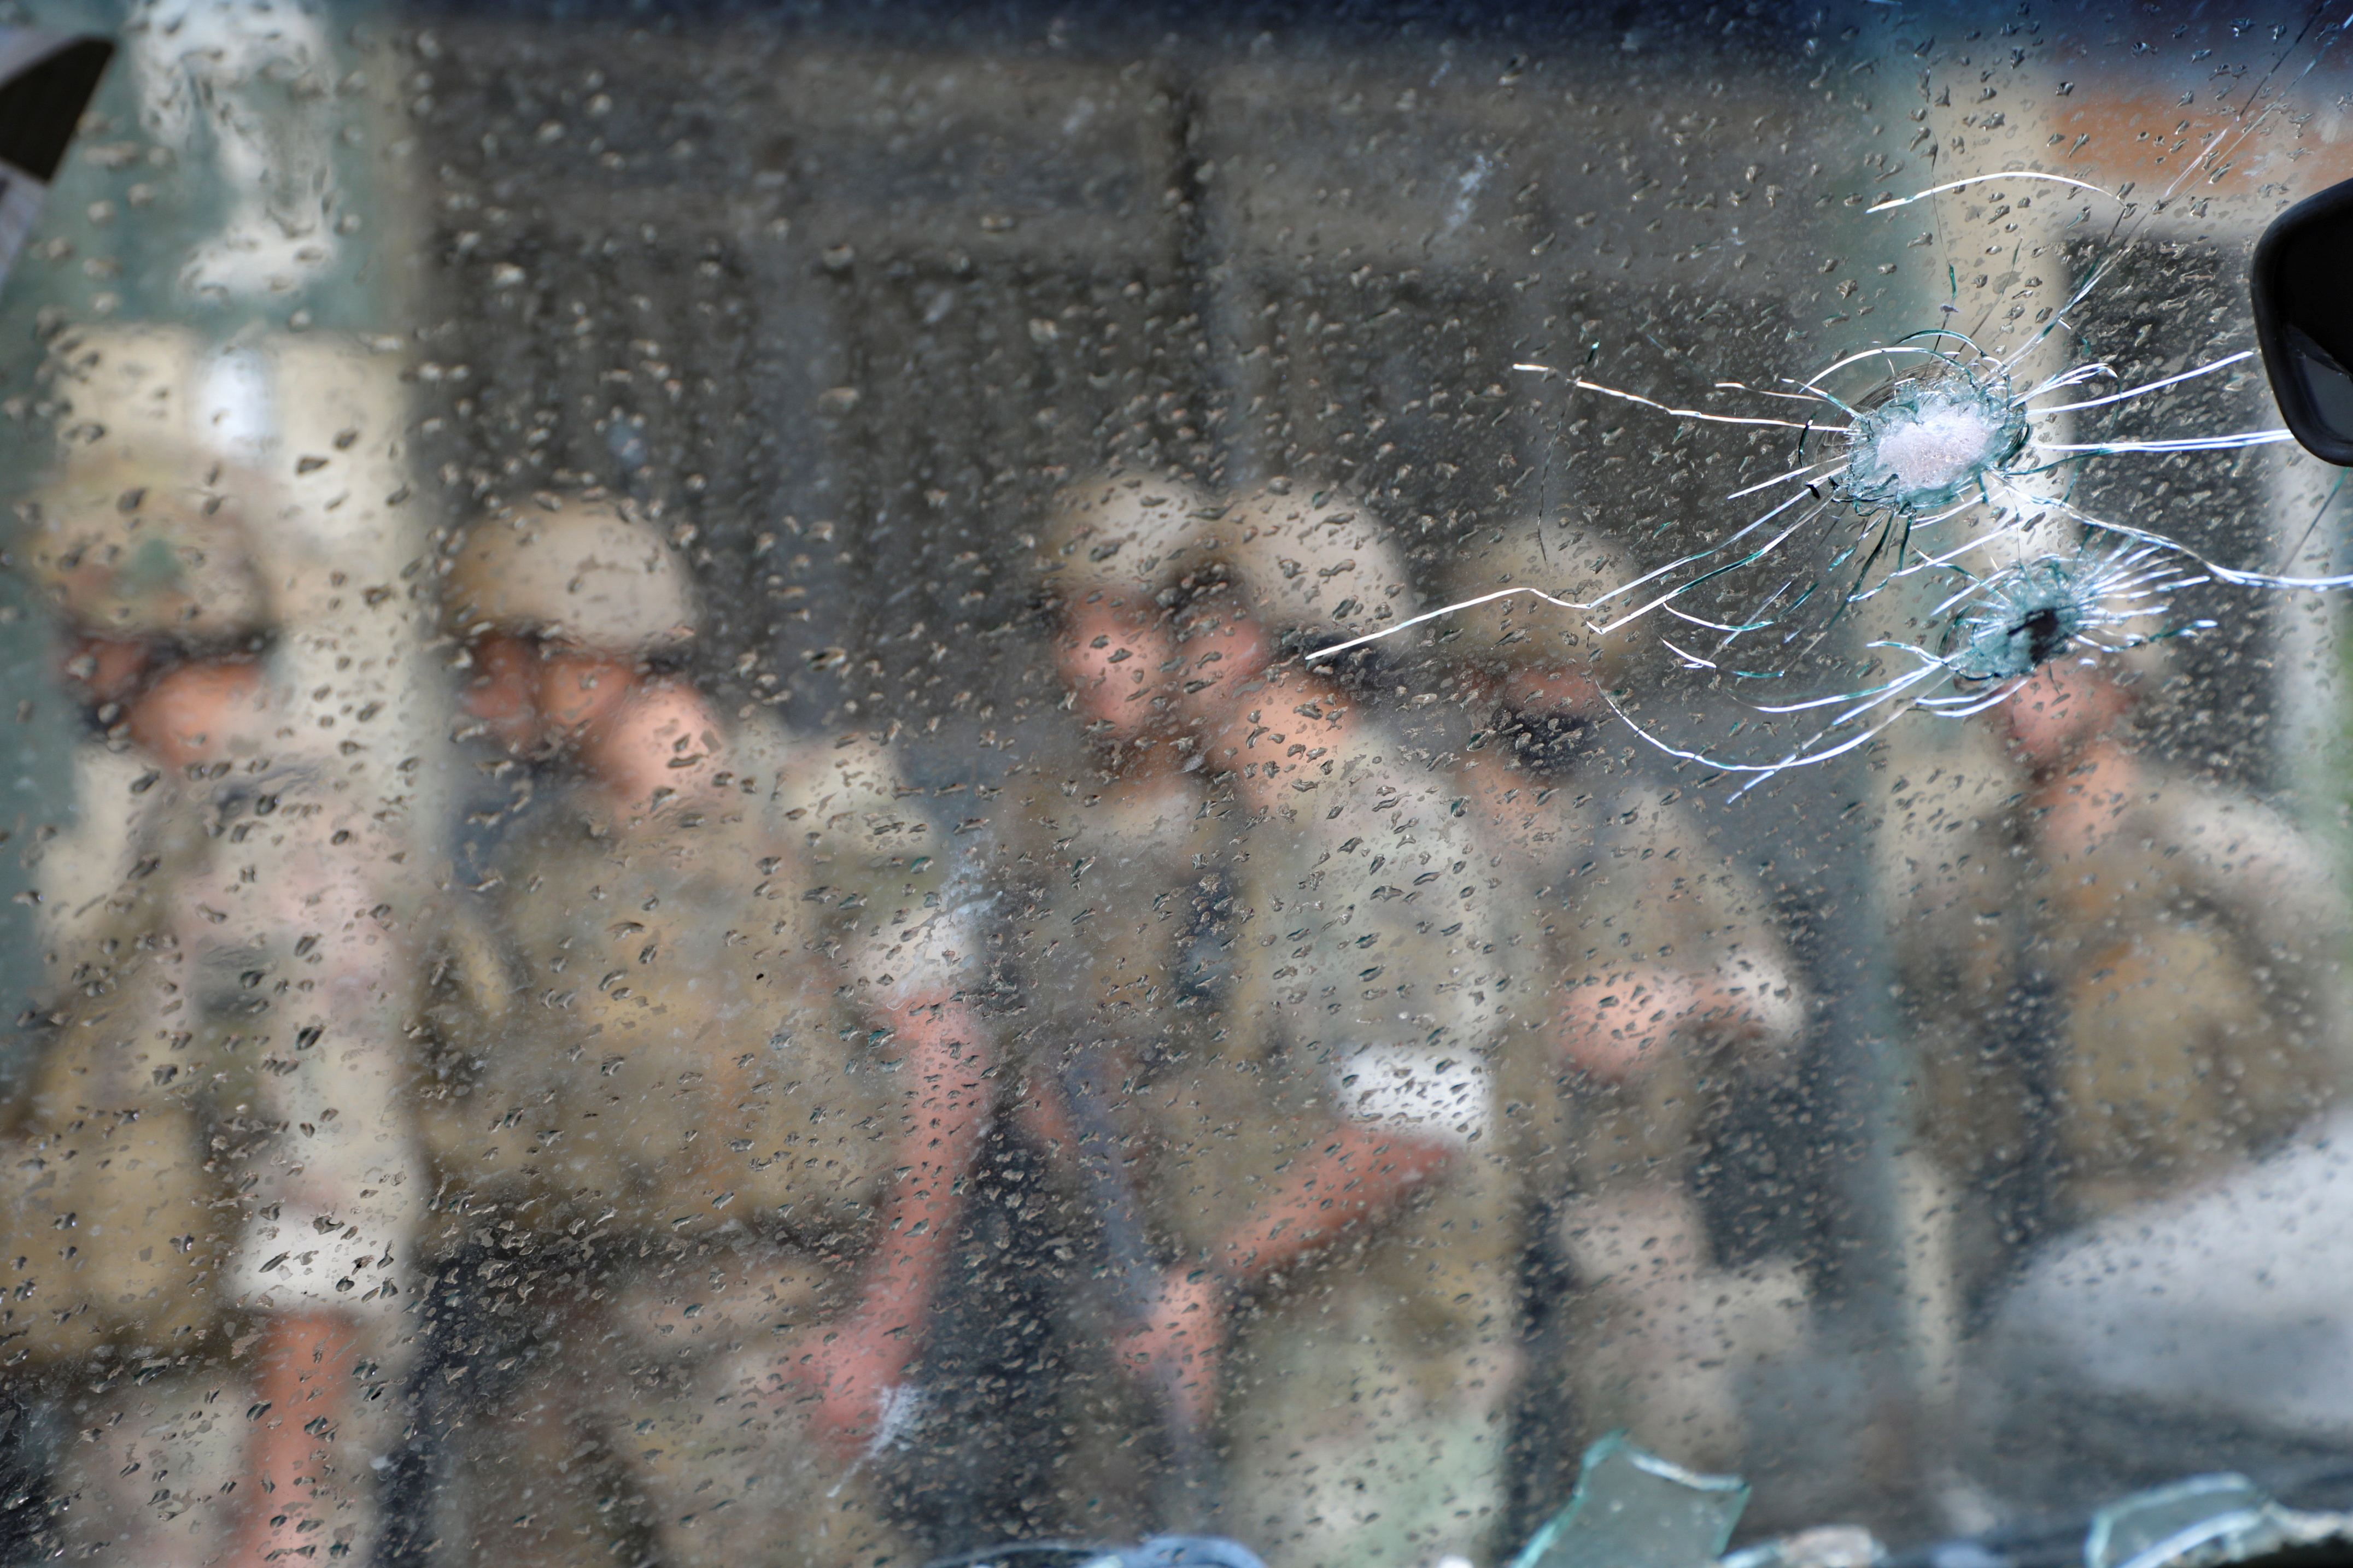 Army soldiers are seen behind a glass with gun holes, after gunfire erupted in Beirut, Lebanon October 14, 2021.  REUTERS/Mohamed Azakir